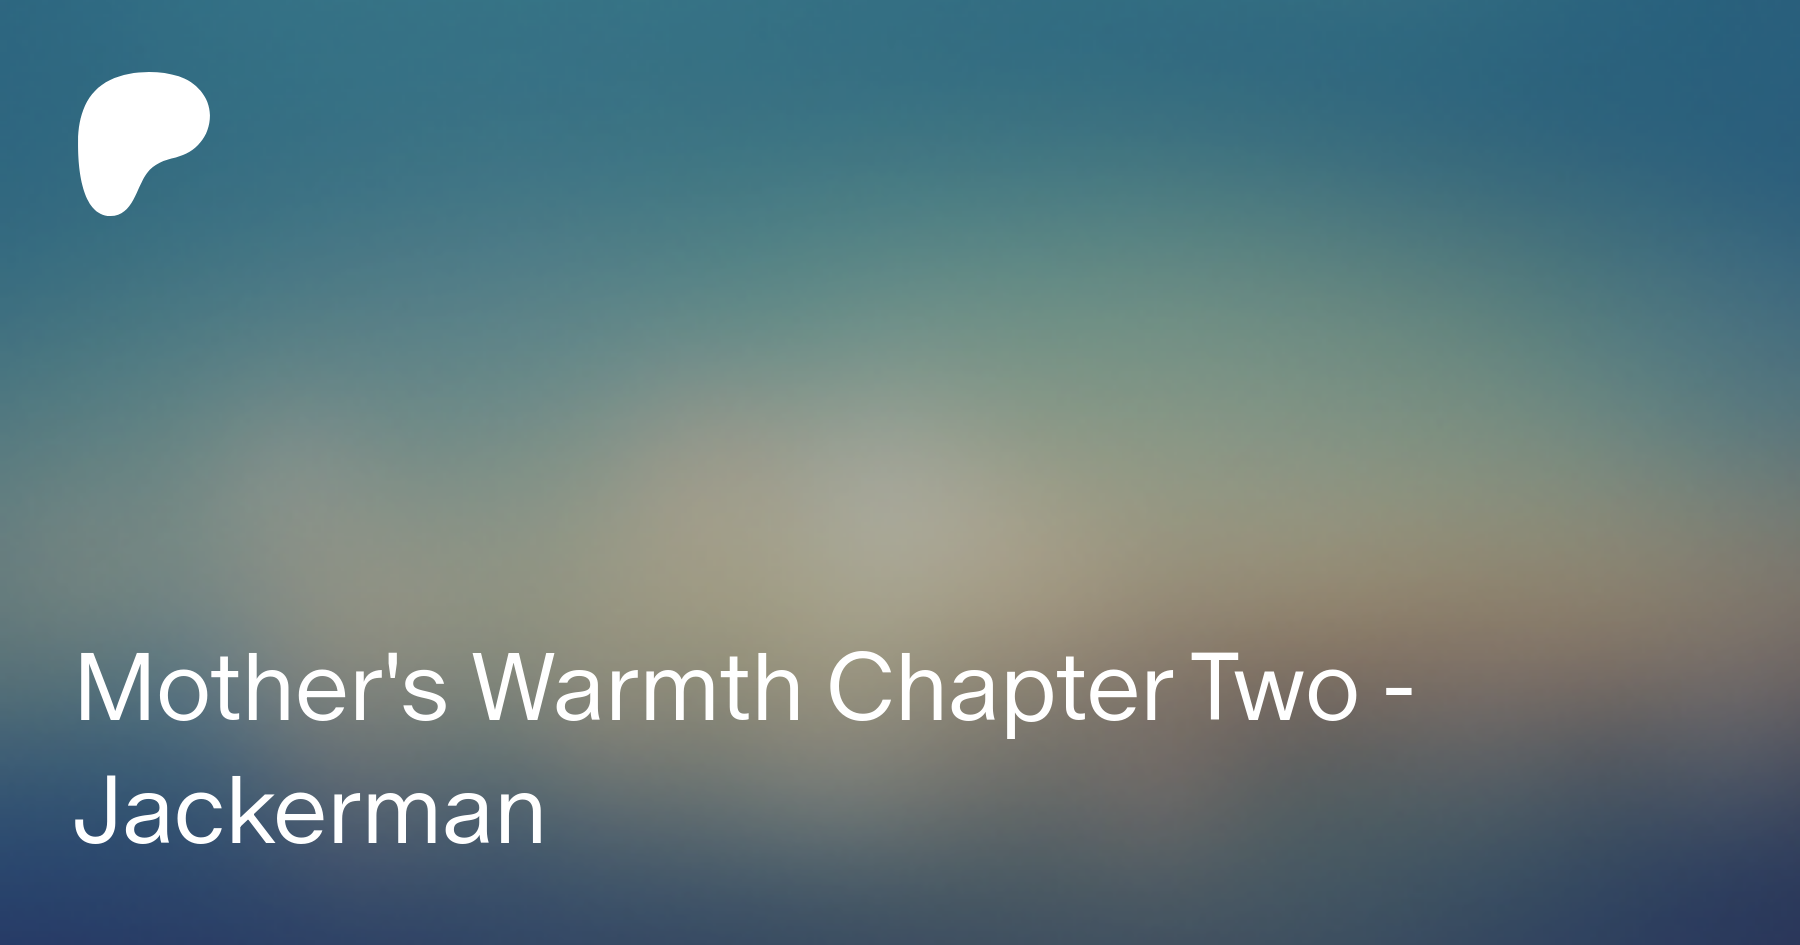 Warmth chapter two